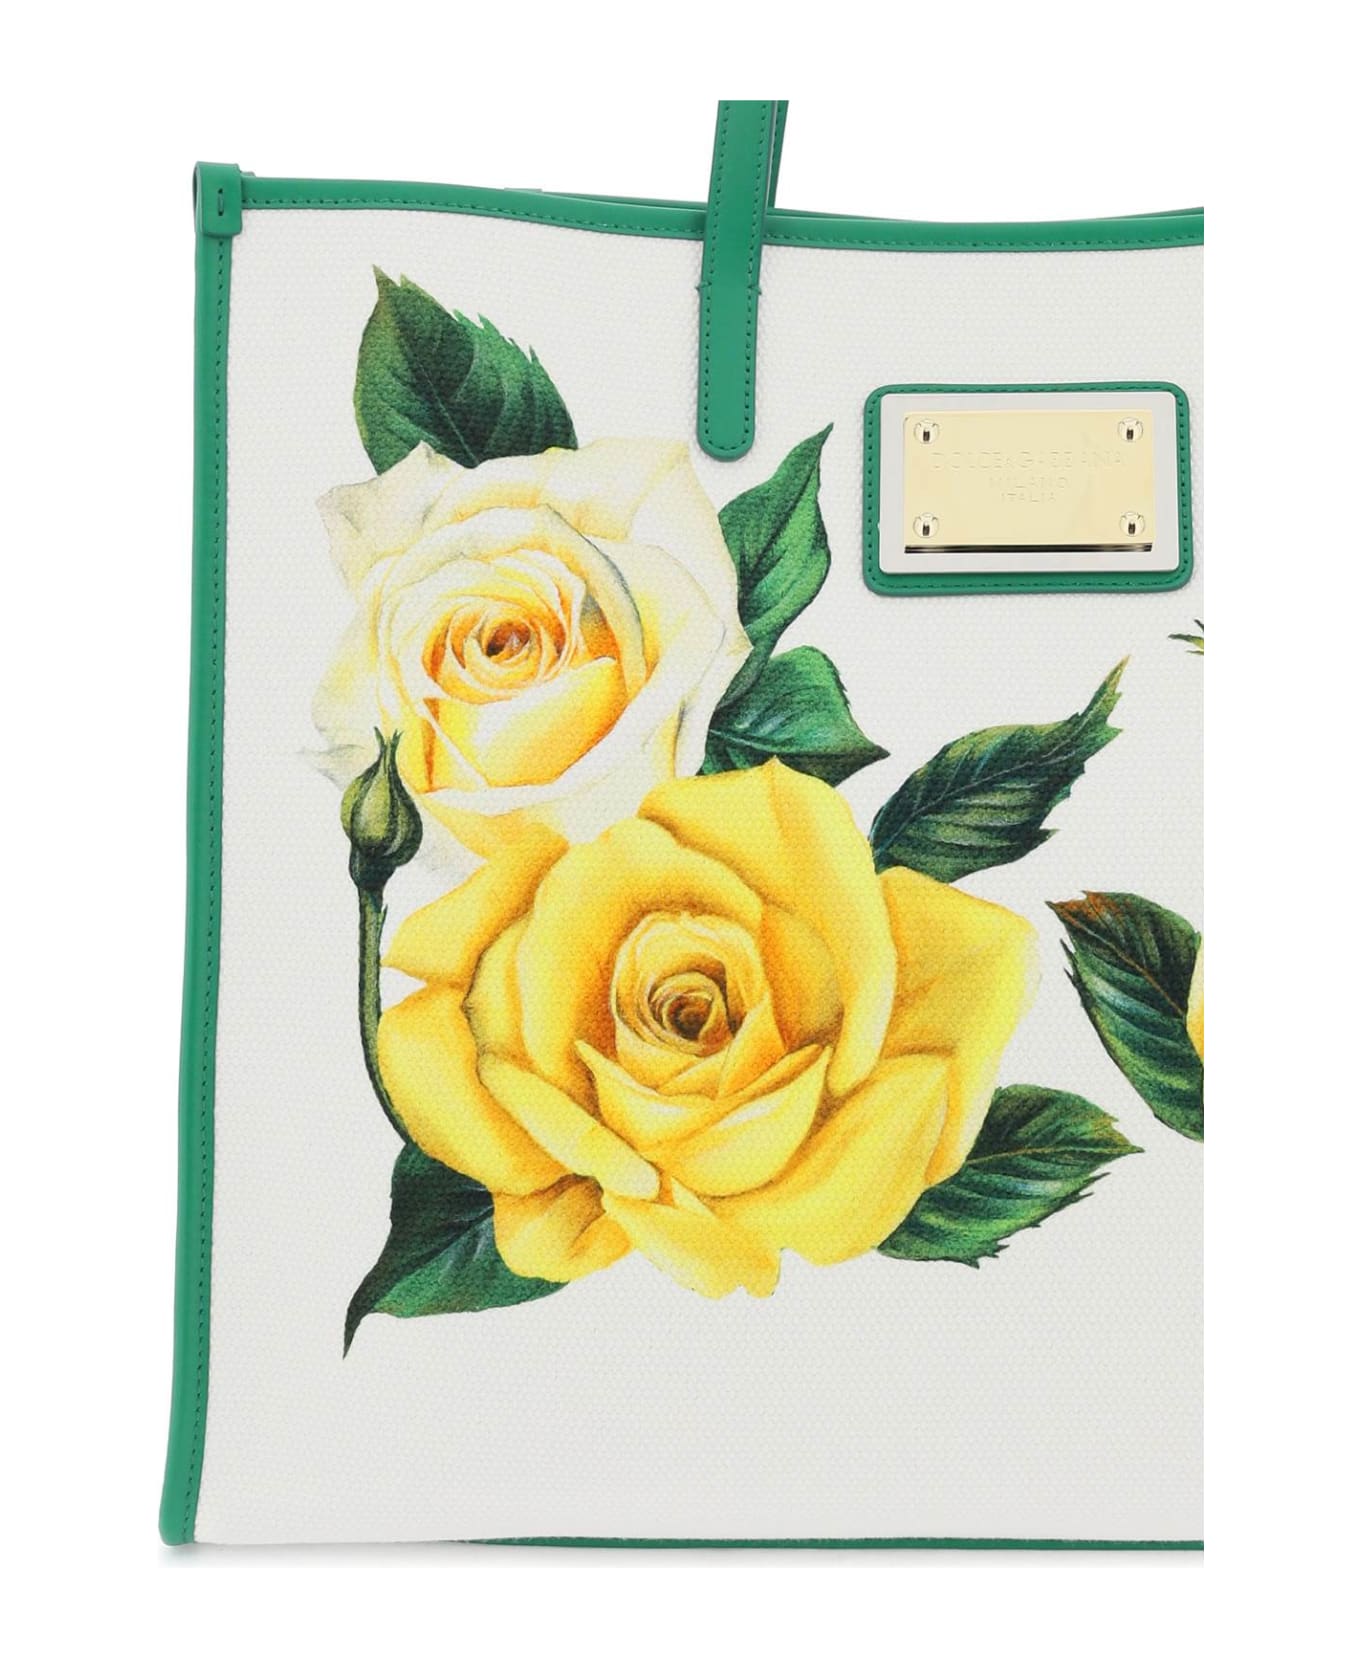 Dolce & Gabbana Tote Bag With Print - ROSE GIALLE FDO BCO (White)